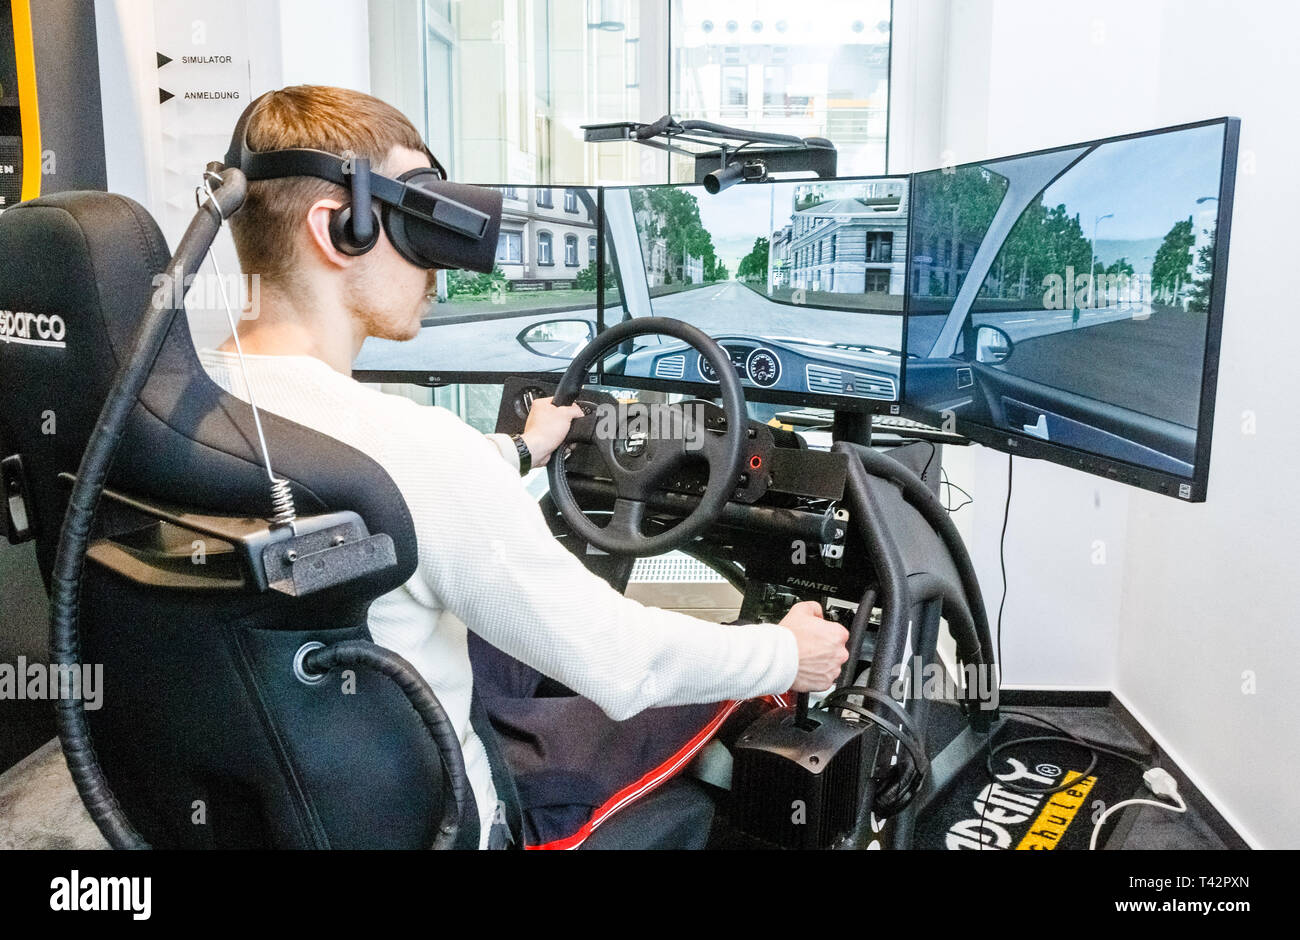 Hamburg, Germany. 13th Apr, 2019. A young man sits with VR (Virtual Reality) glasses in 360 degree driving simulator. By practicing in artificial reality, driving lessons are to be saved in